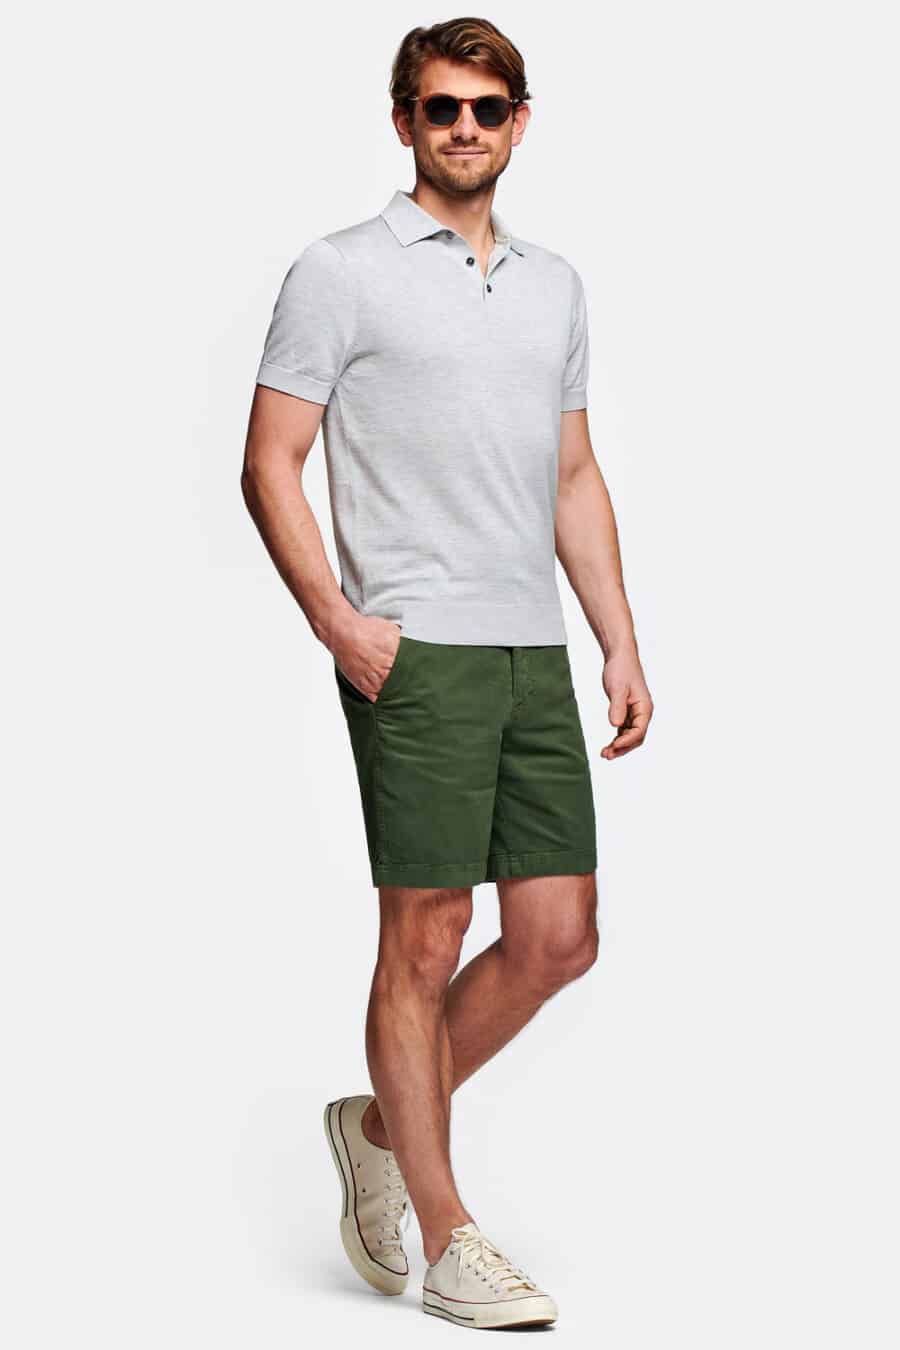 Men's green shorts, light grey polo shirt and off-white canvas sneakers outfit